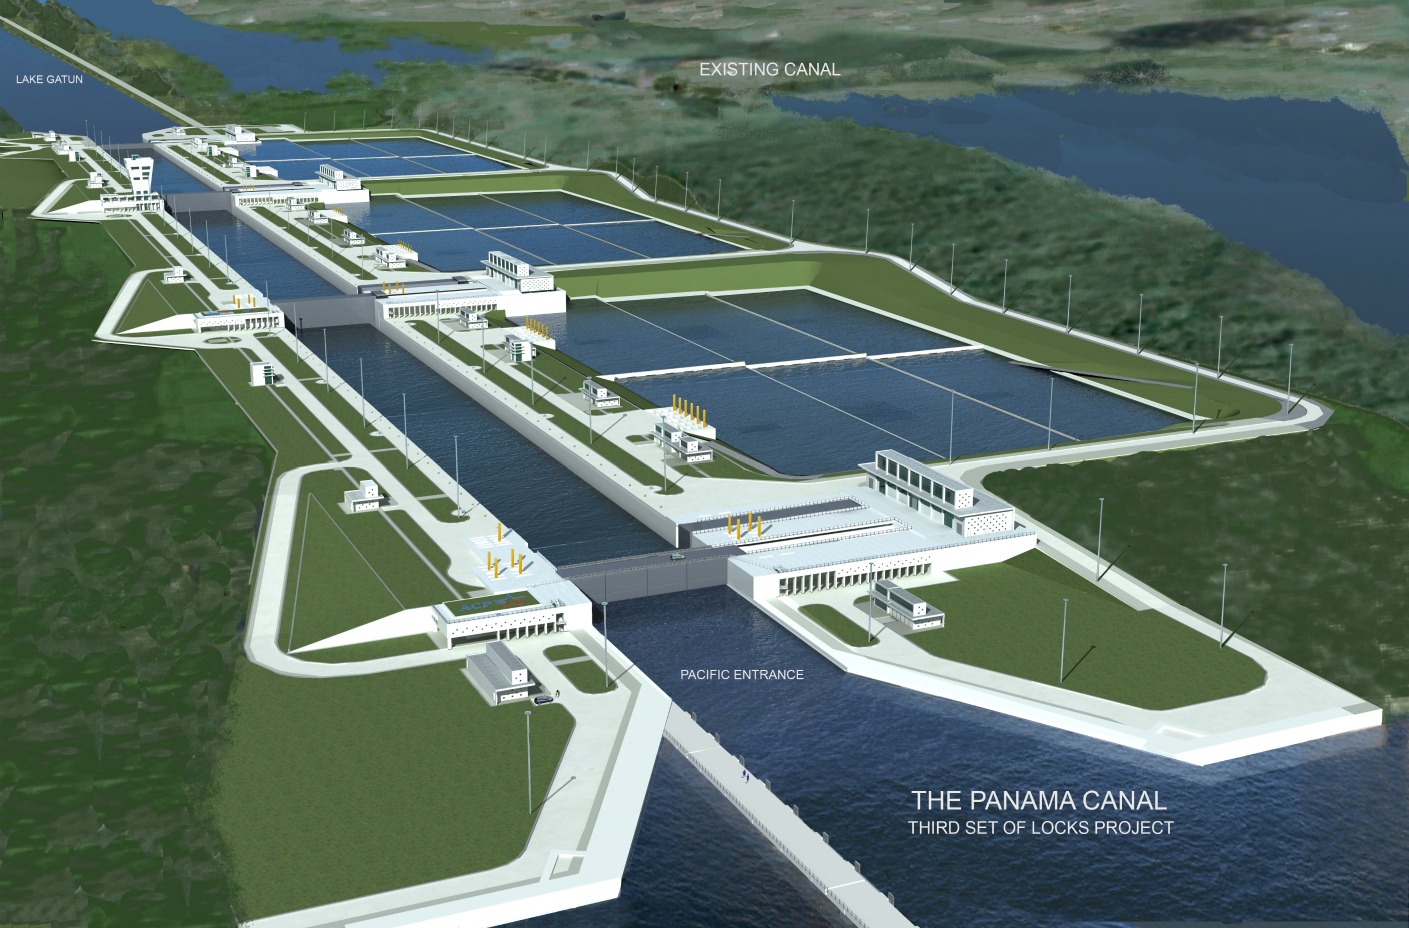 Monster Machines: The Panama Canal’s Newest Gates Are Truly Gargantuan